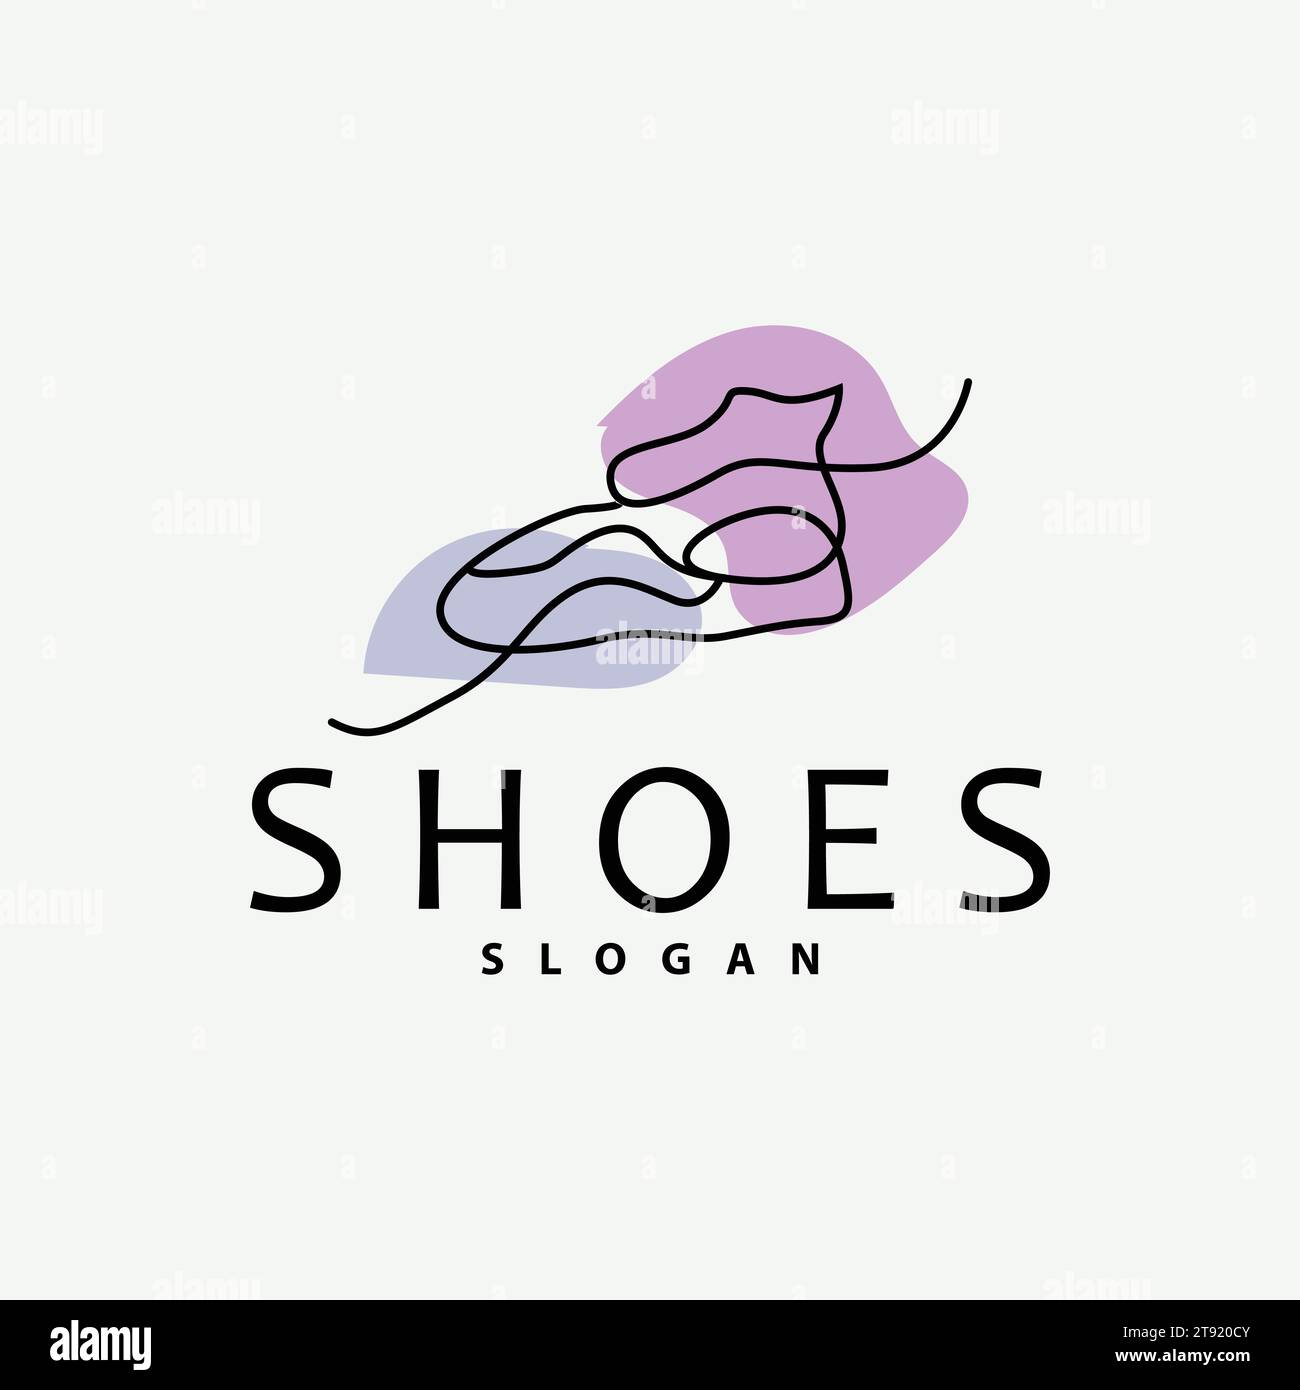 Shoes Logo, Shoes Design Simple Minimalist Line Style, Fashion Brand Vector, Icon Illustration Stock Vector